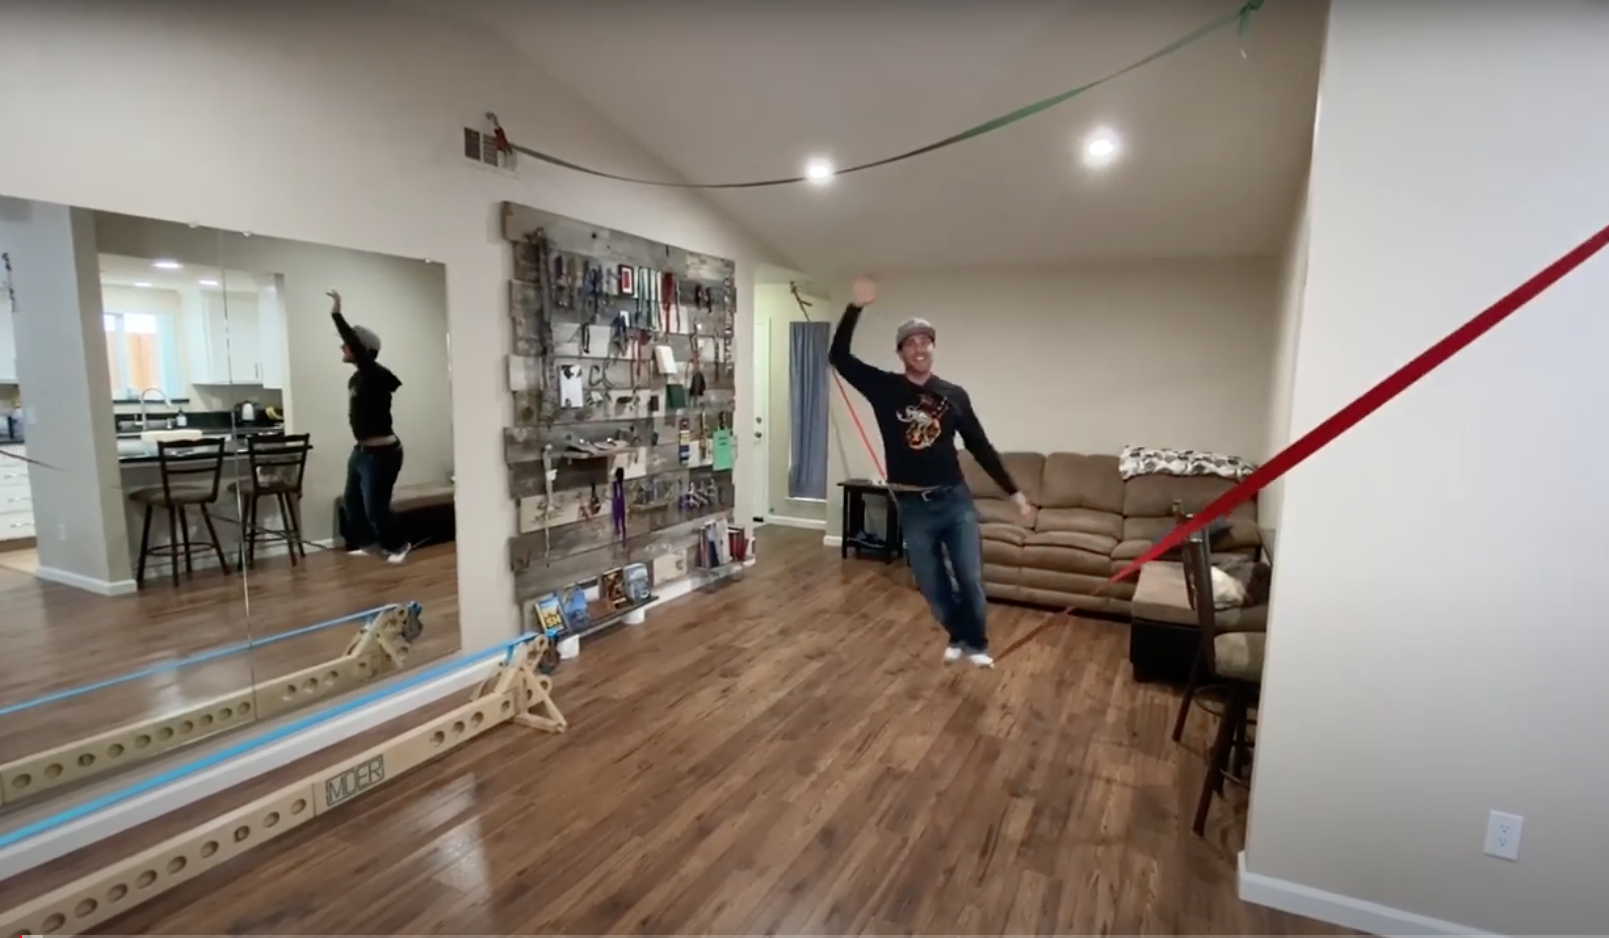 How to install a rodeo slackline in your home